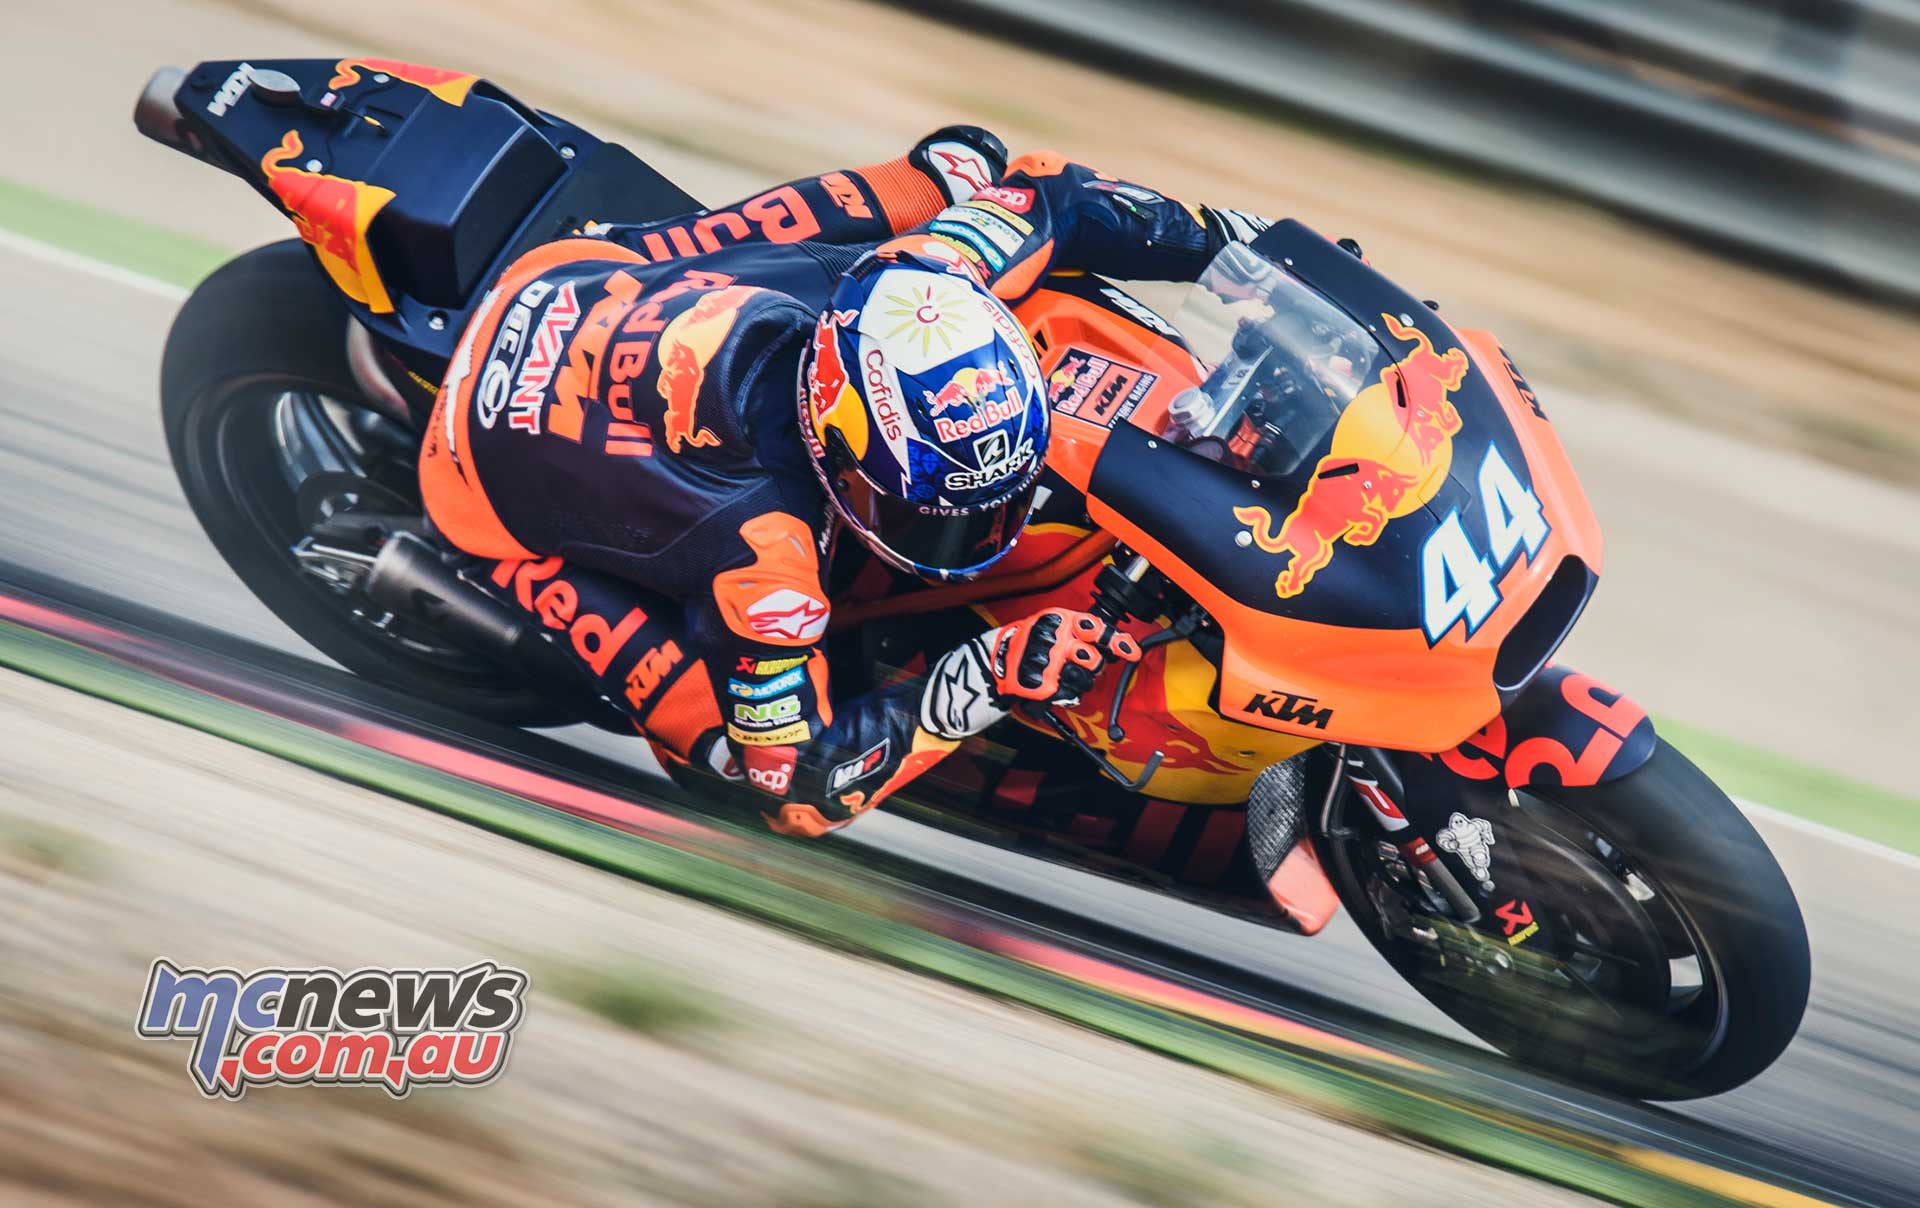 Misano MotoGP Images Gallery E | Motorcycle News, Sport 